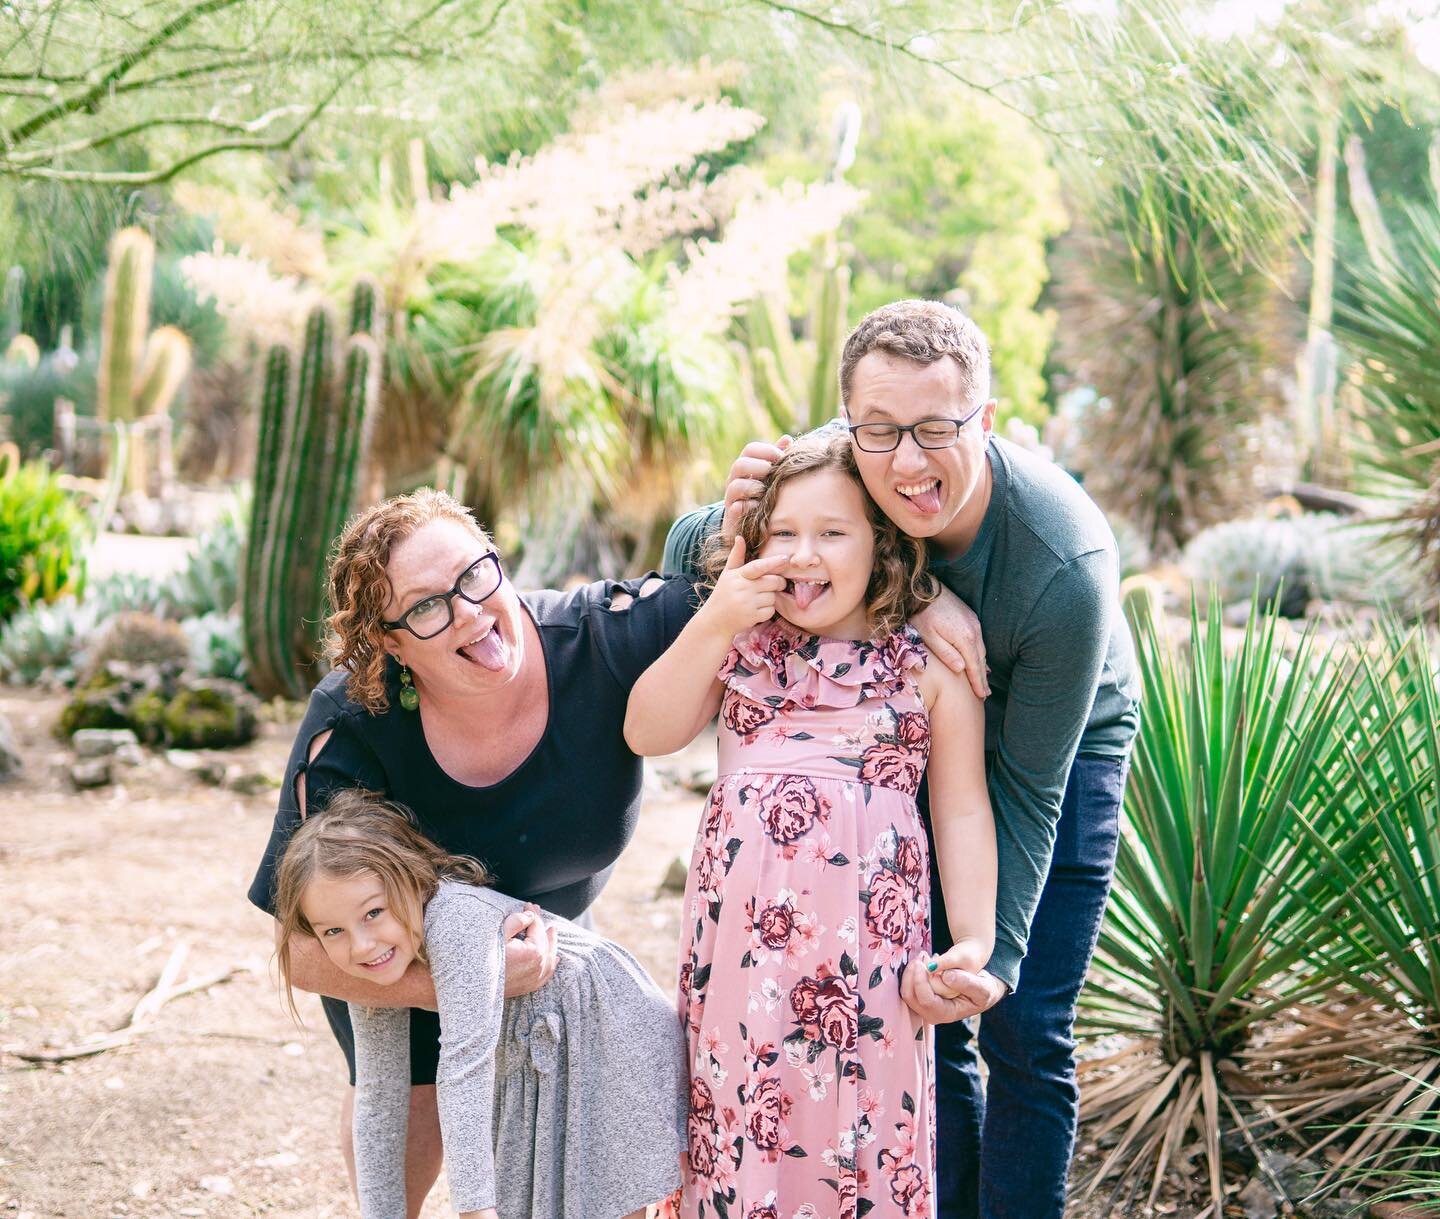 Don&rsquo;t know about you, but this school week has got us feeling 🤪 at least we are halfway through. 
To see all the photos from this session go to PictureHummable.com 💕
*
*
📸 by Juliet in the Bay Area
*
*
#familyphotography #picturehum